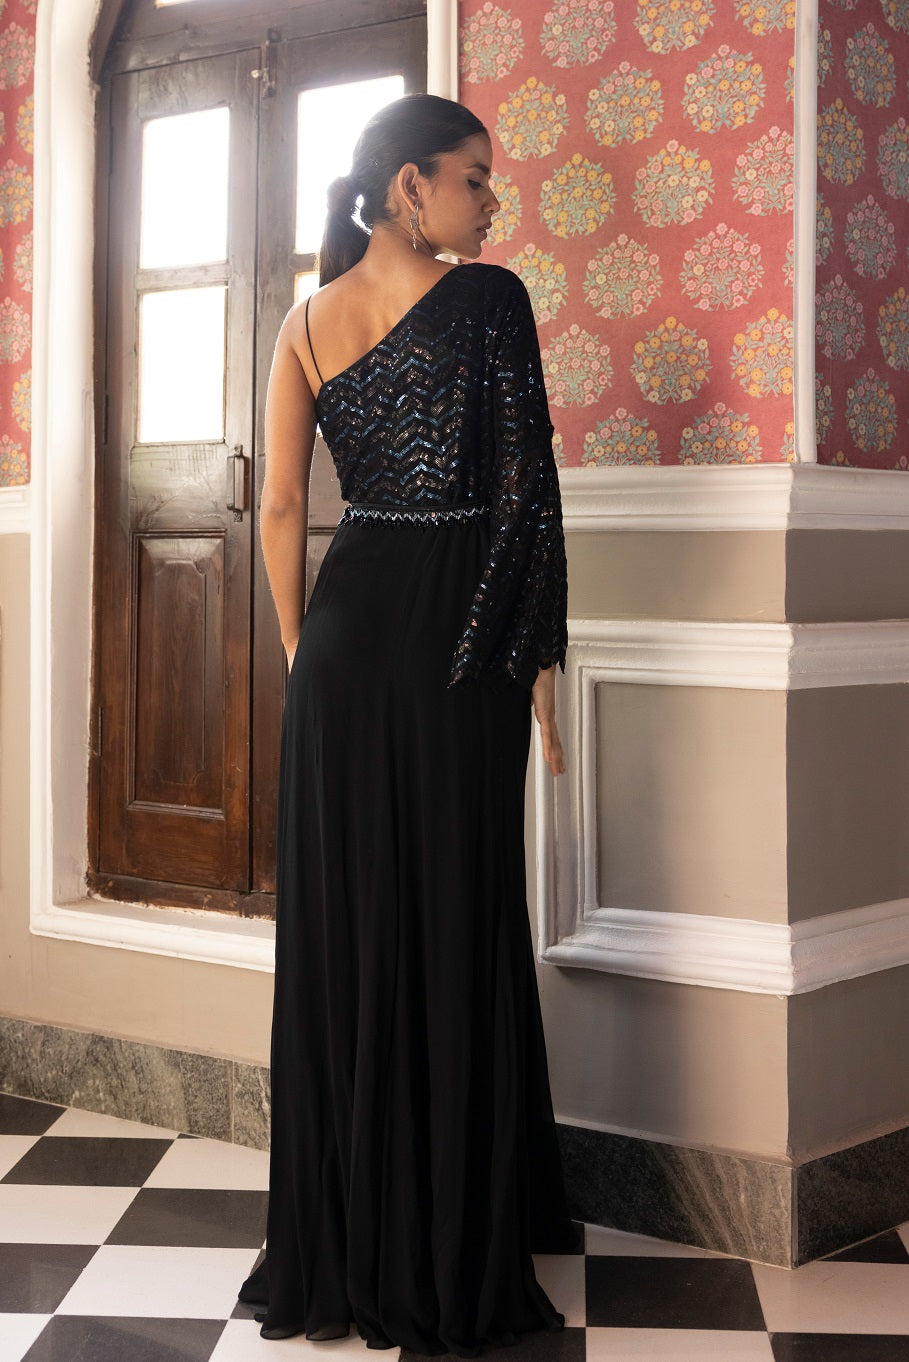 Beautiful black sequinned embroidered one-sided full sleeves and other side strappy sleeves gown. This gown is perfect for cocktail parties. Dazzle on weddings and special occasions with exquisite Indian designer dresses, sharara suits, Anarkali suits, and wedding lehengas from Pure Elegance Indian fashion store in the USA.